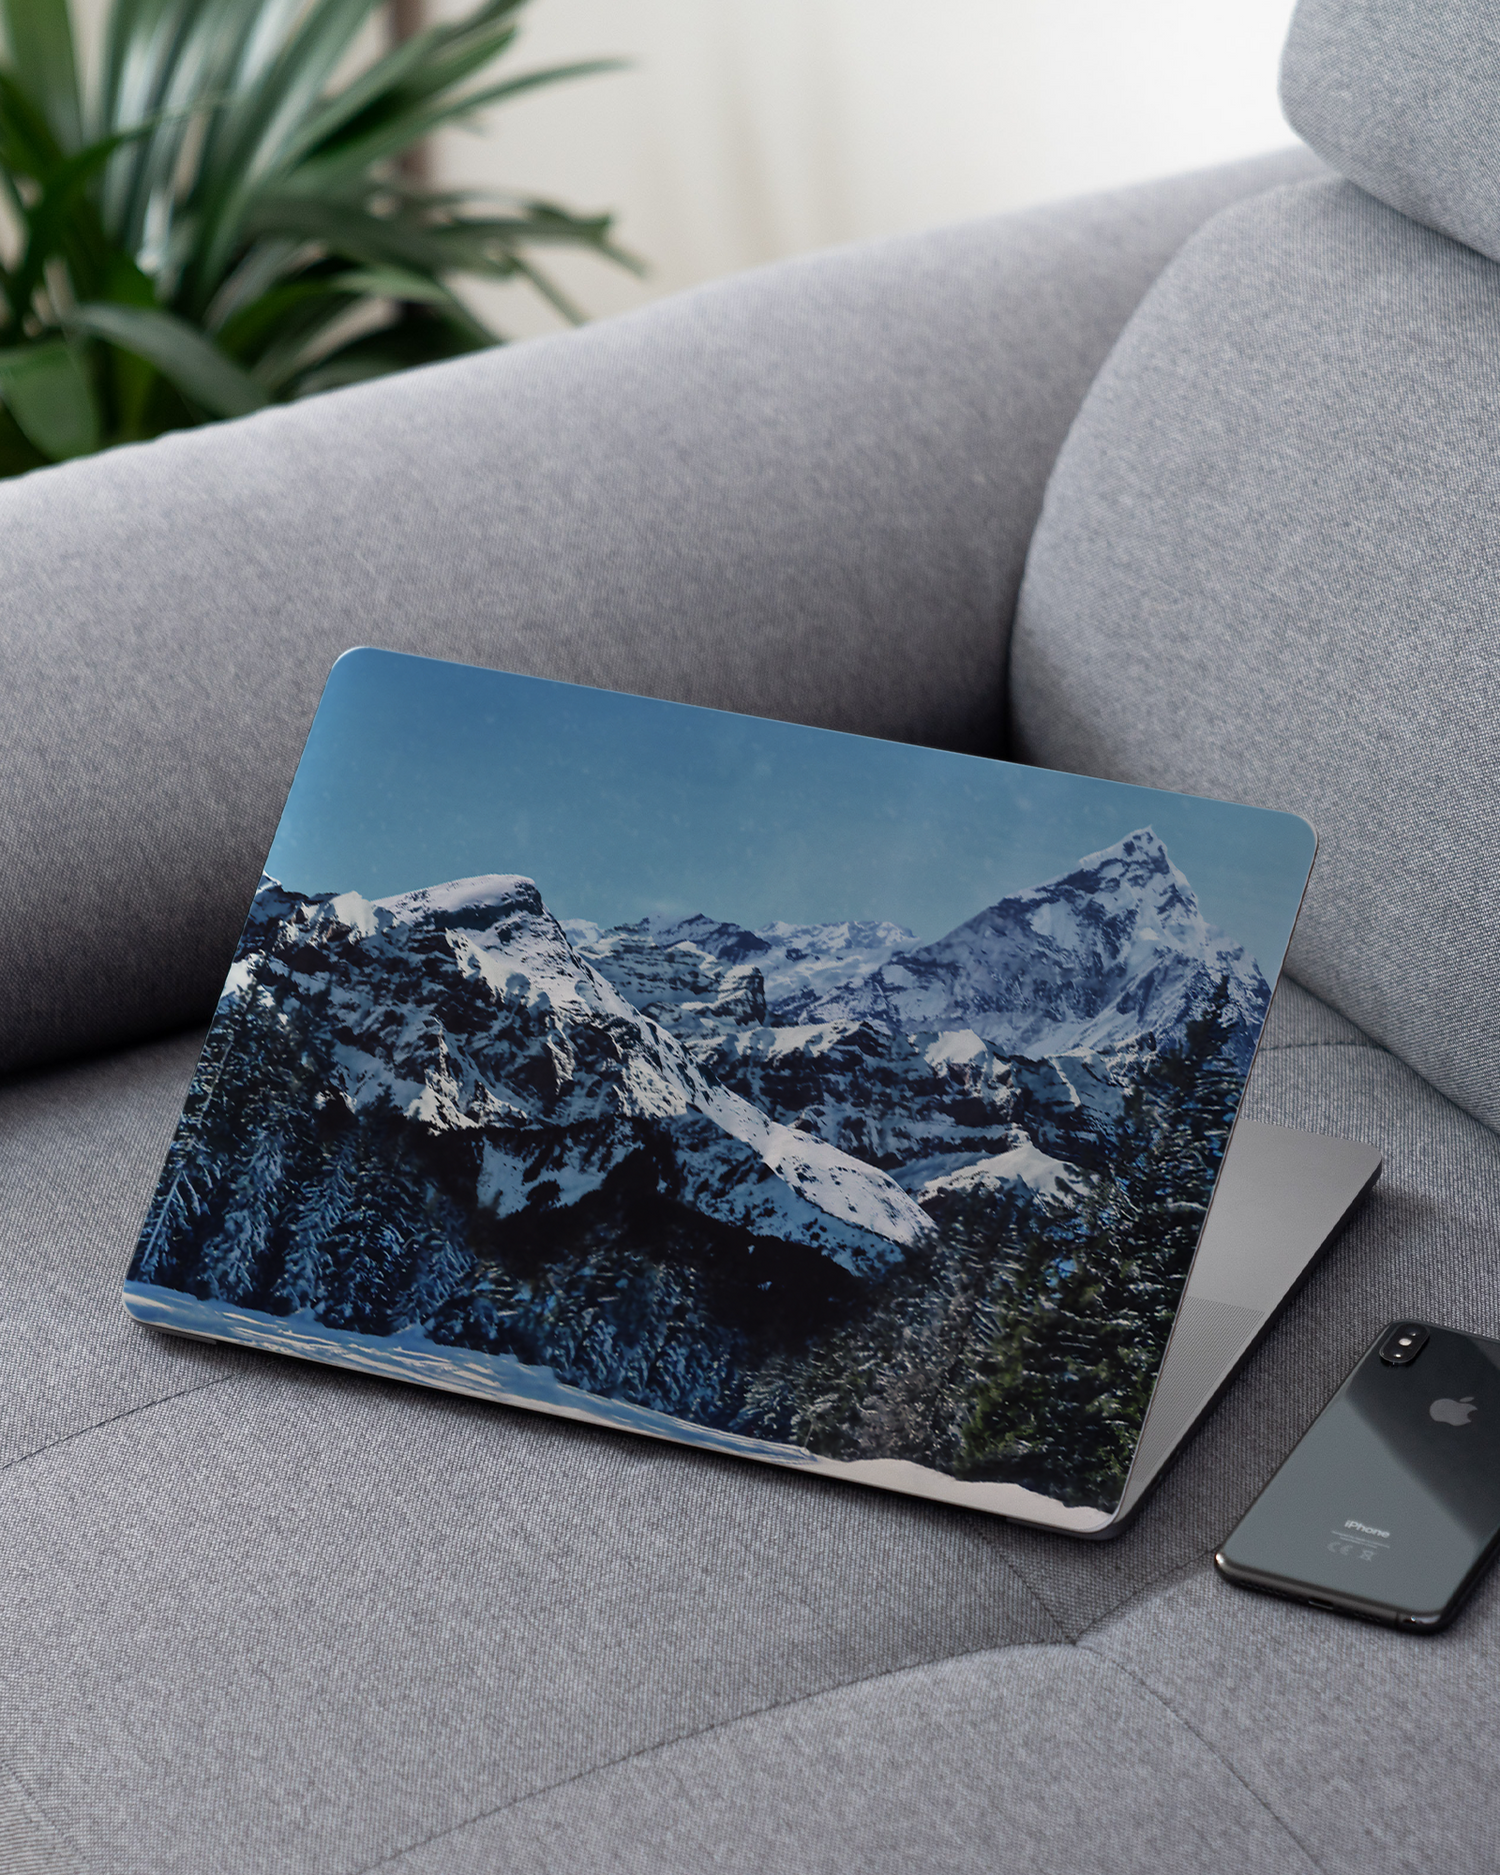 Winter Landscape Laptop Skin for 13 inch Apple MacBooks on a couch